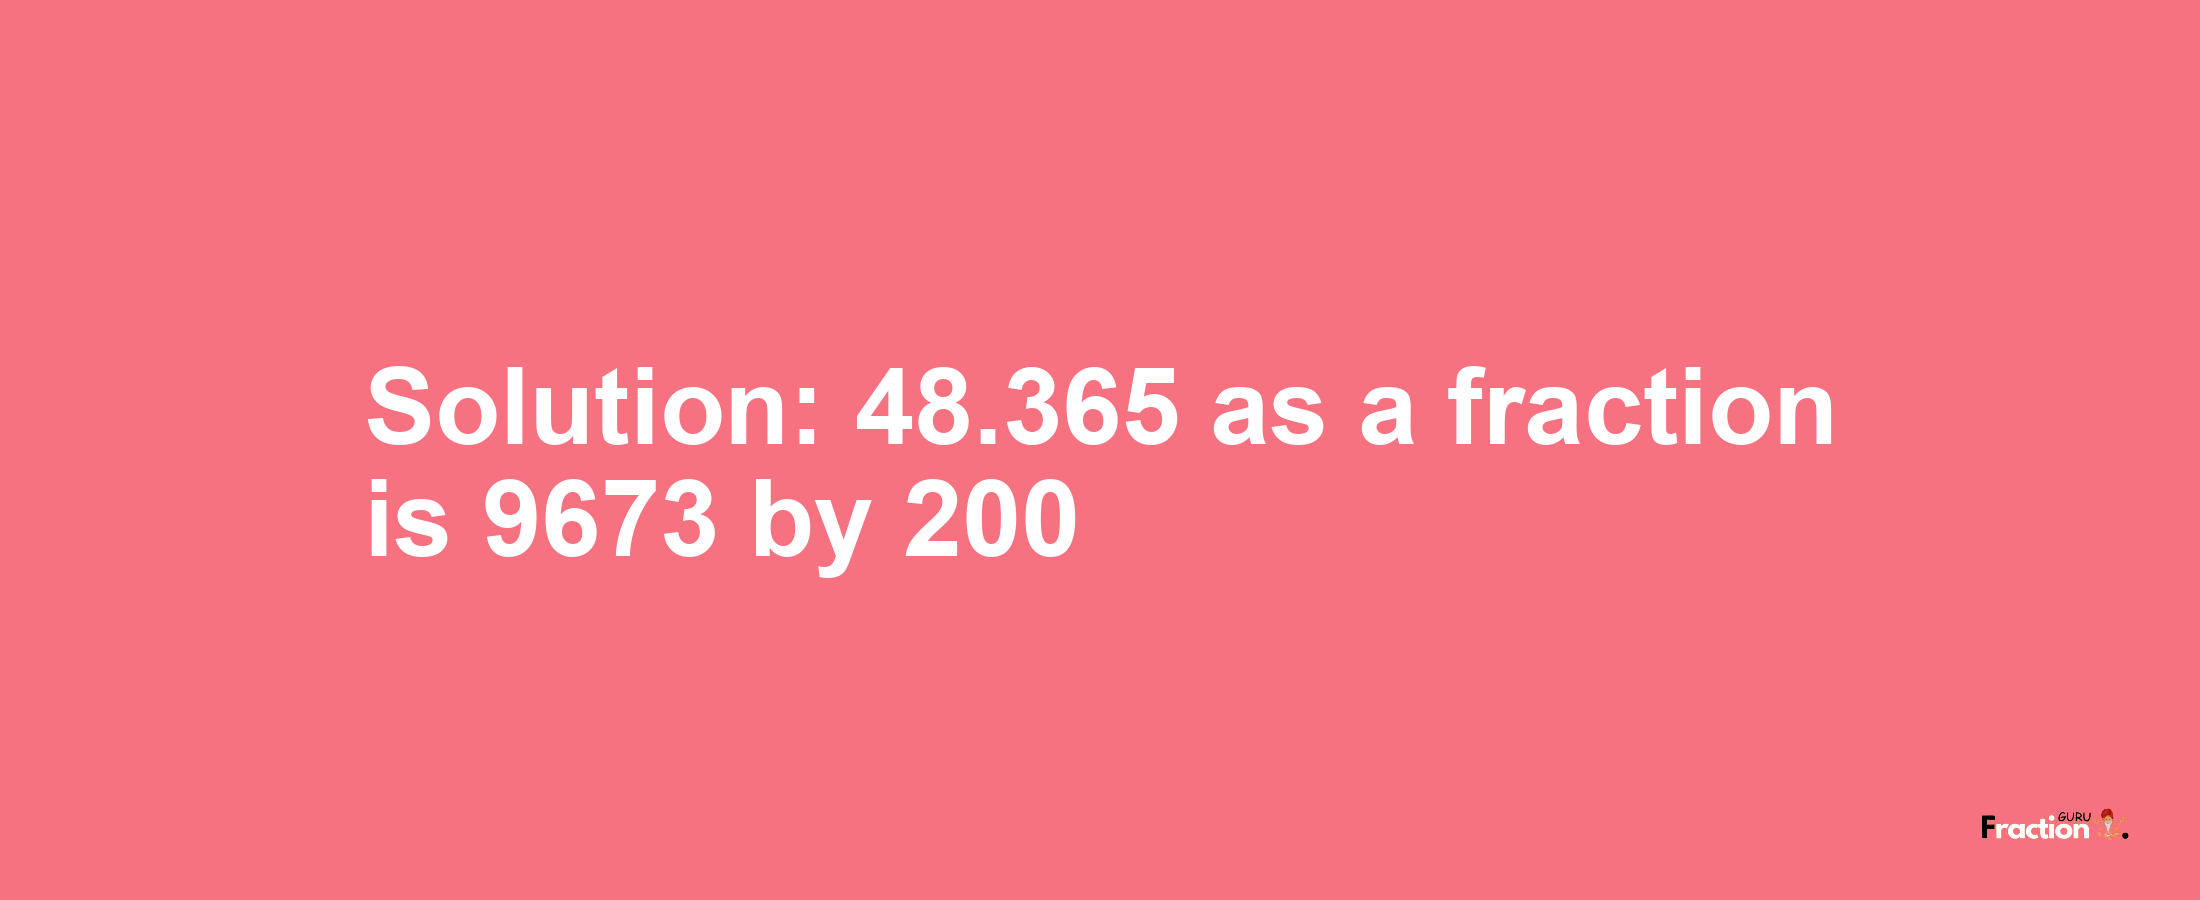 Solution:48.365 as a fraction is 9673/200